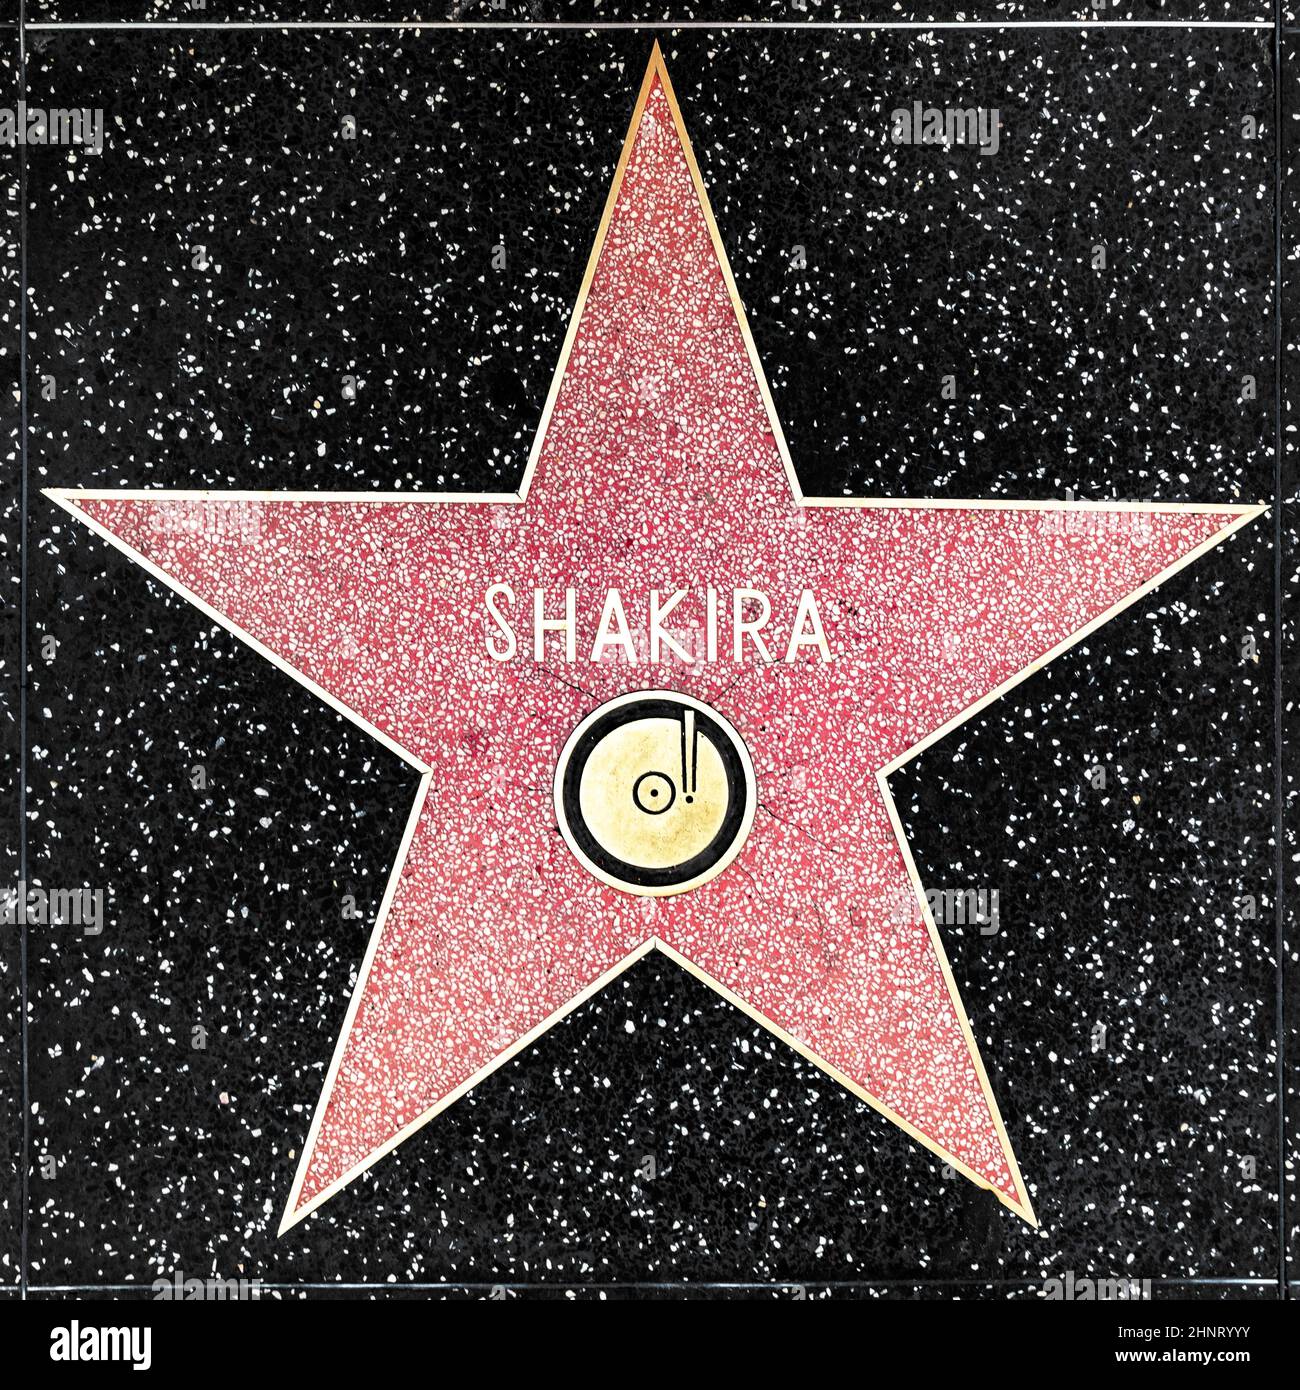 closeup of Star on the Hollywood Walk of Fame for Shakira Stock Photo